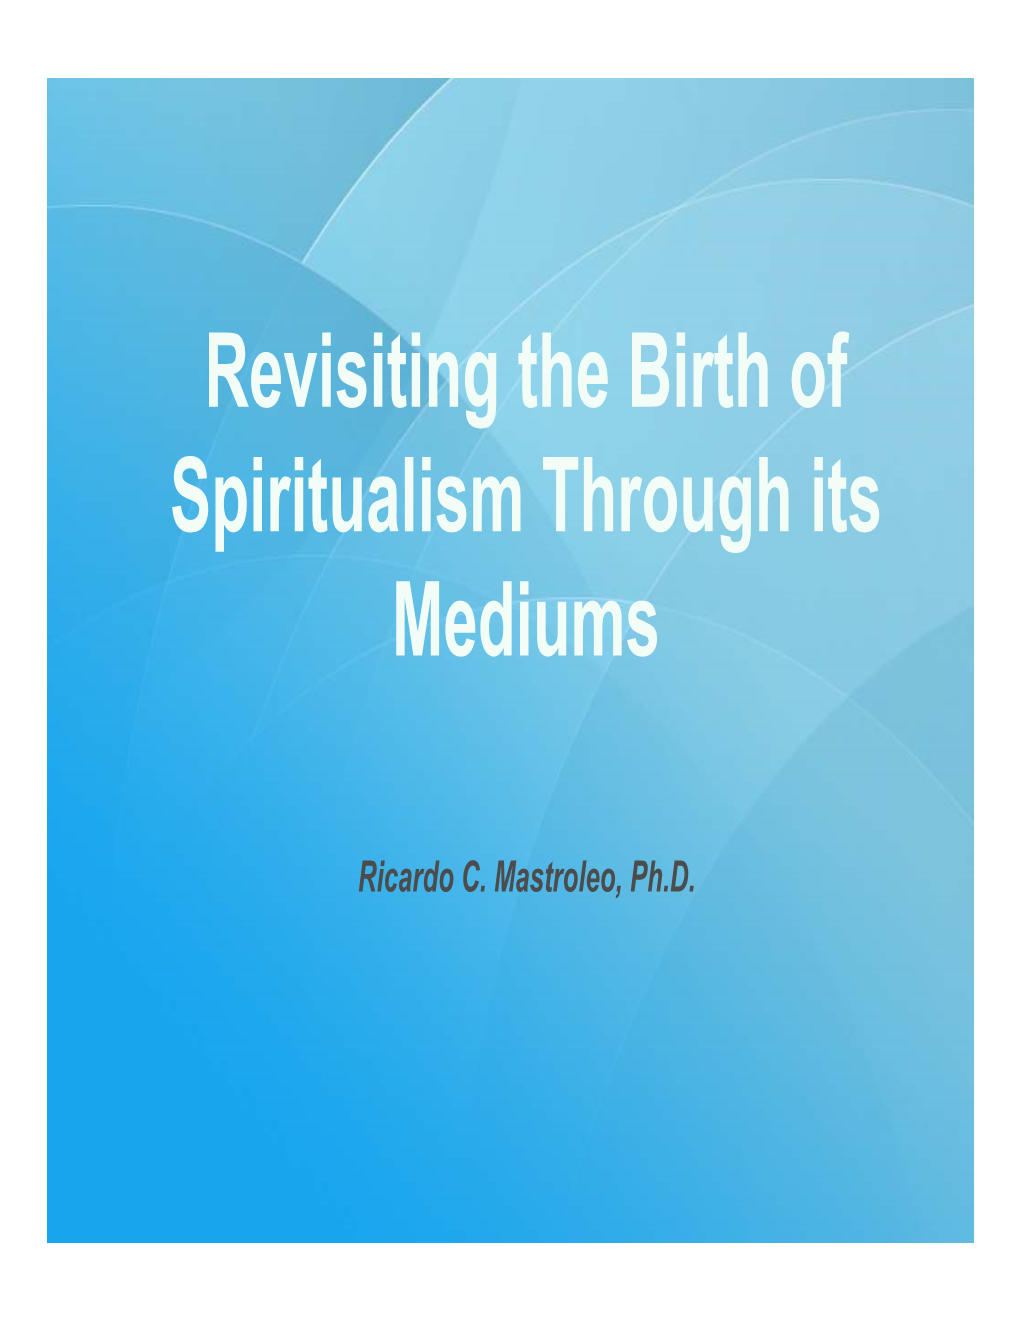 Revisiting the Birth of Spiritualism Through Its Mediums